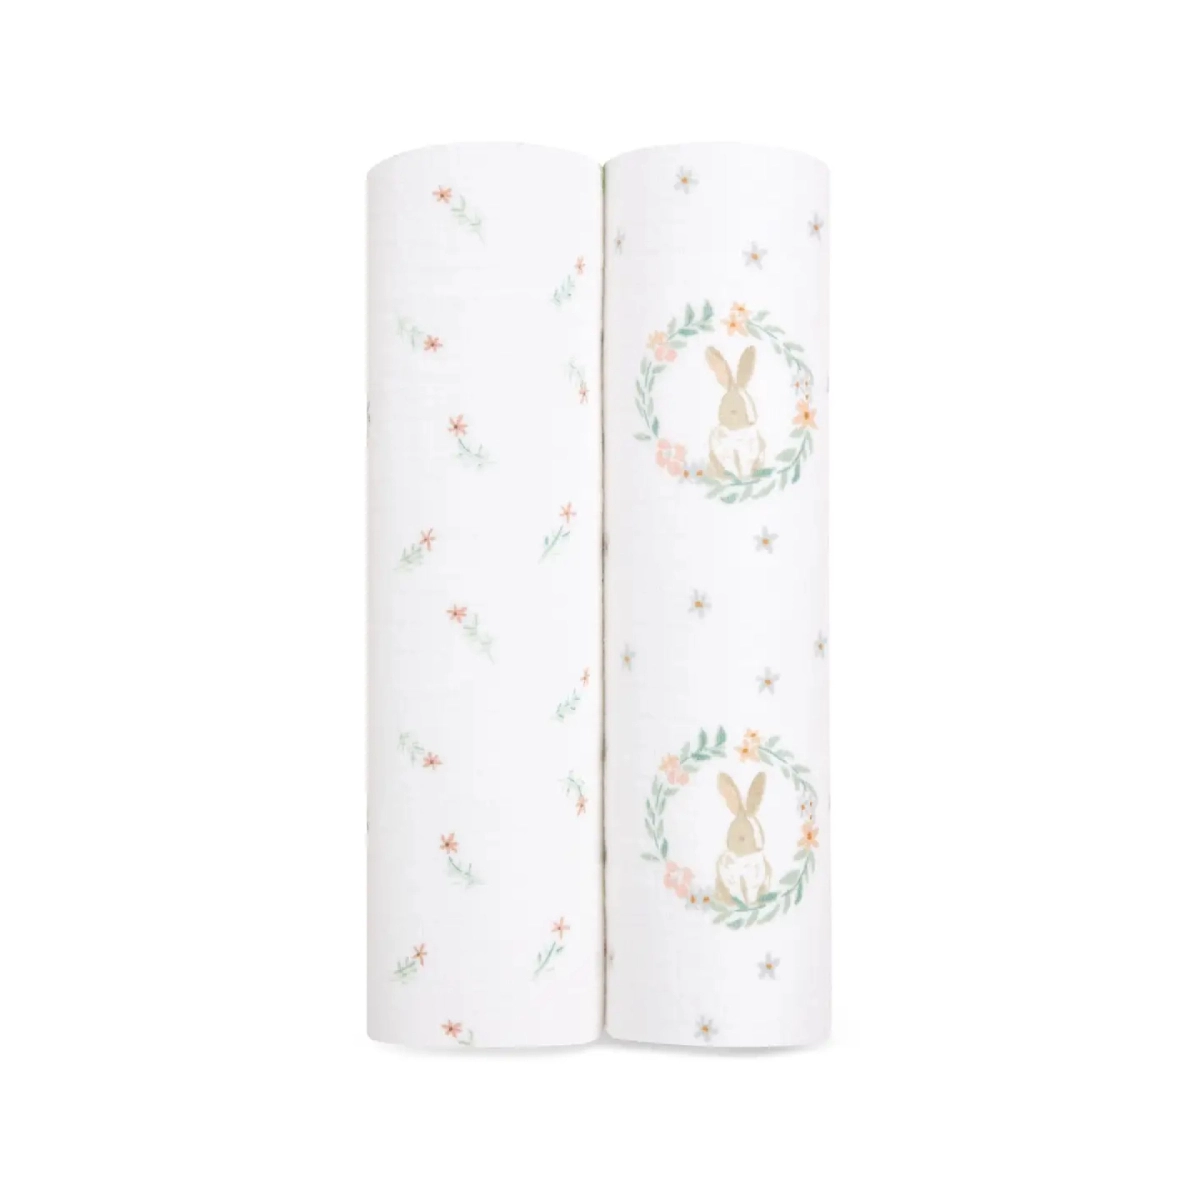 Aden + Anais Pack of 2 Essentials Cotton Muslin Swaddle Blanket